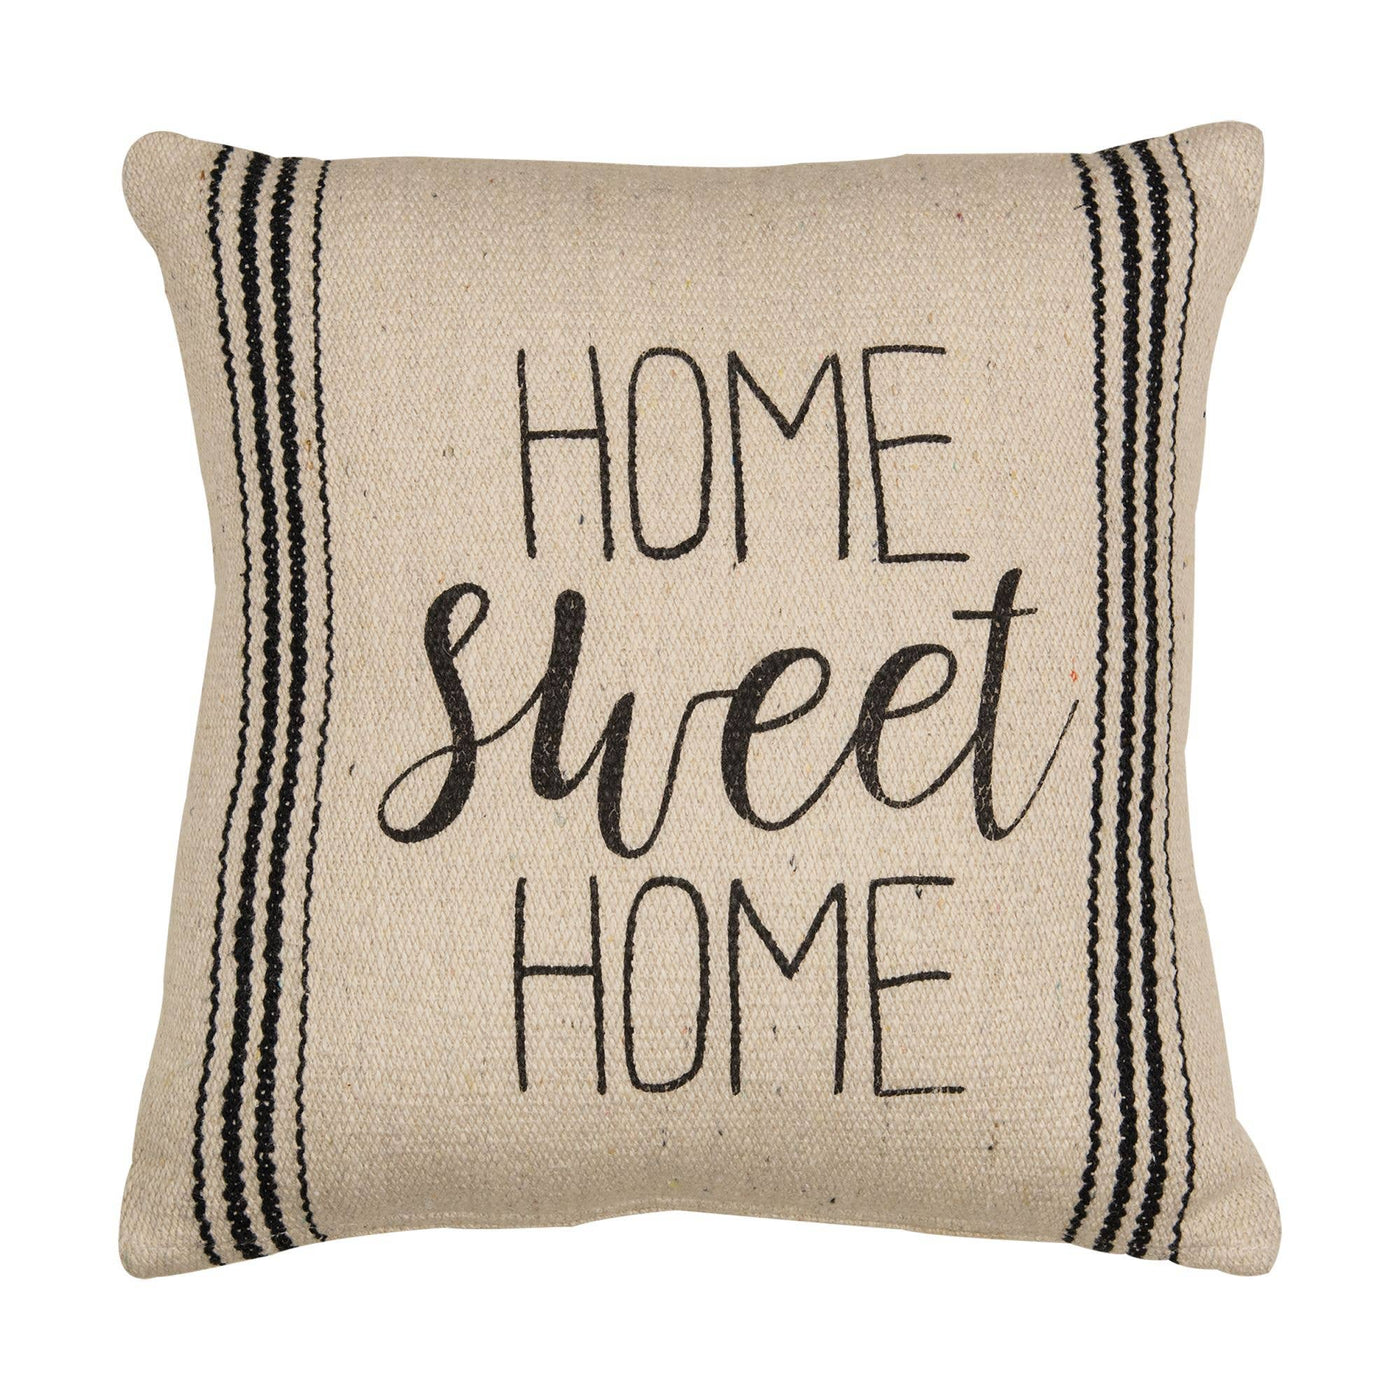 Home Sweet Home Pillow, 10"